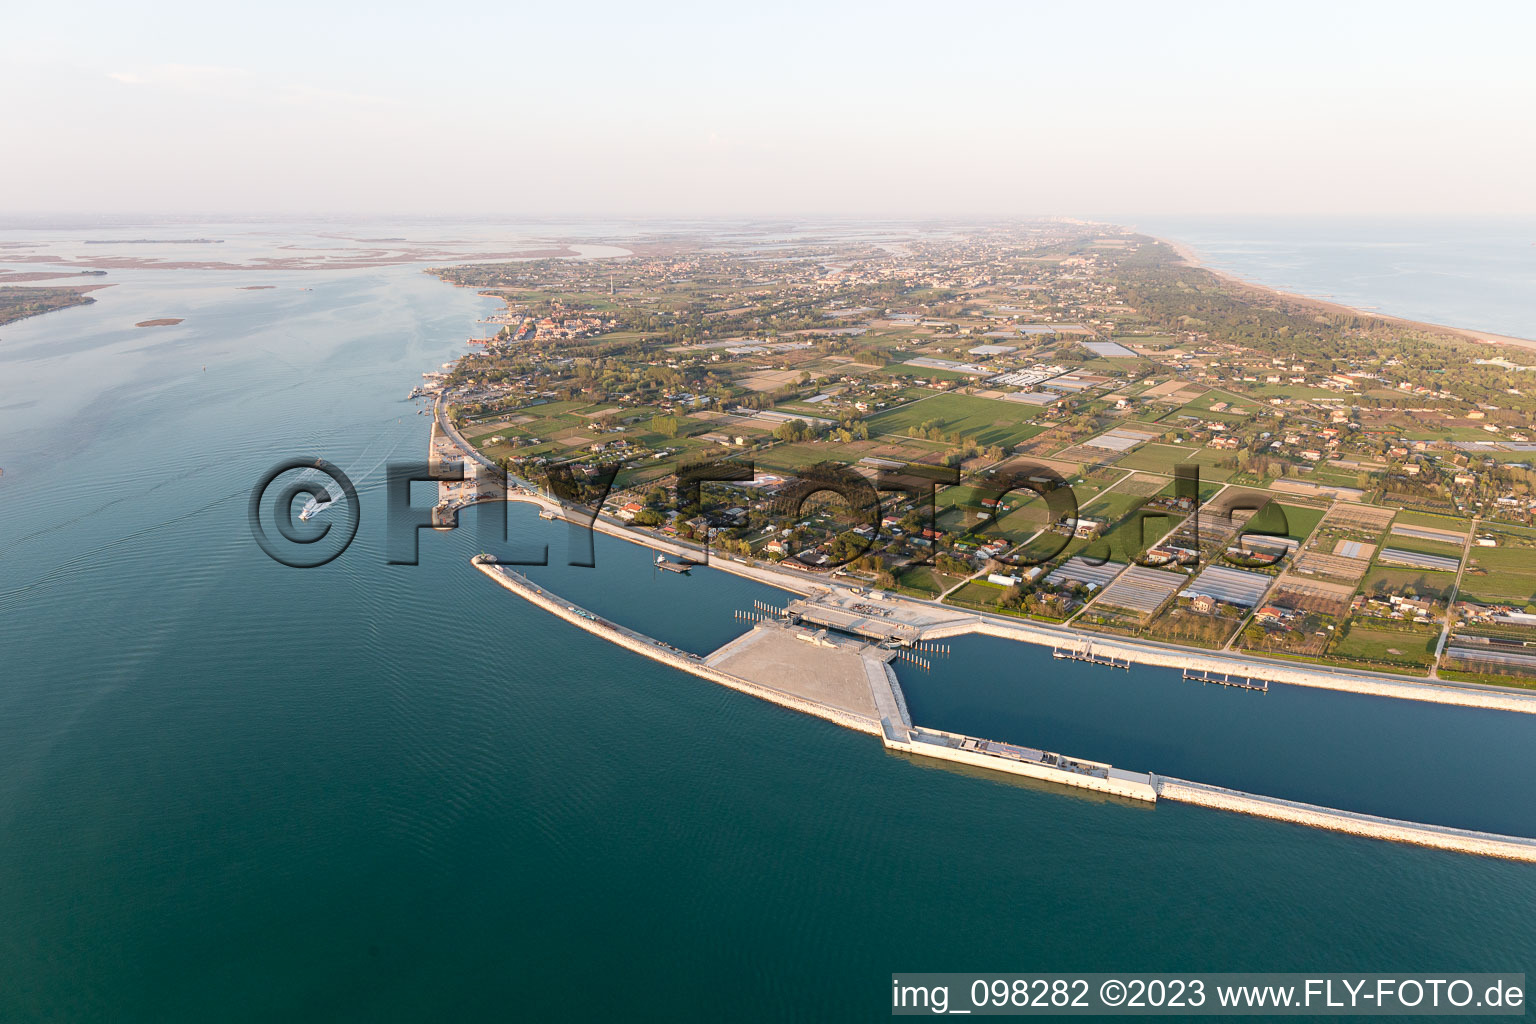 Drone image of Punta Sabbioni in the state Veneto, Italy